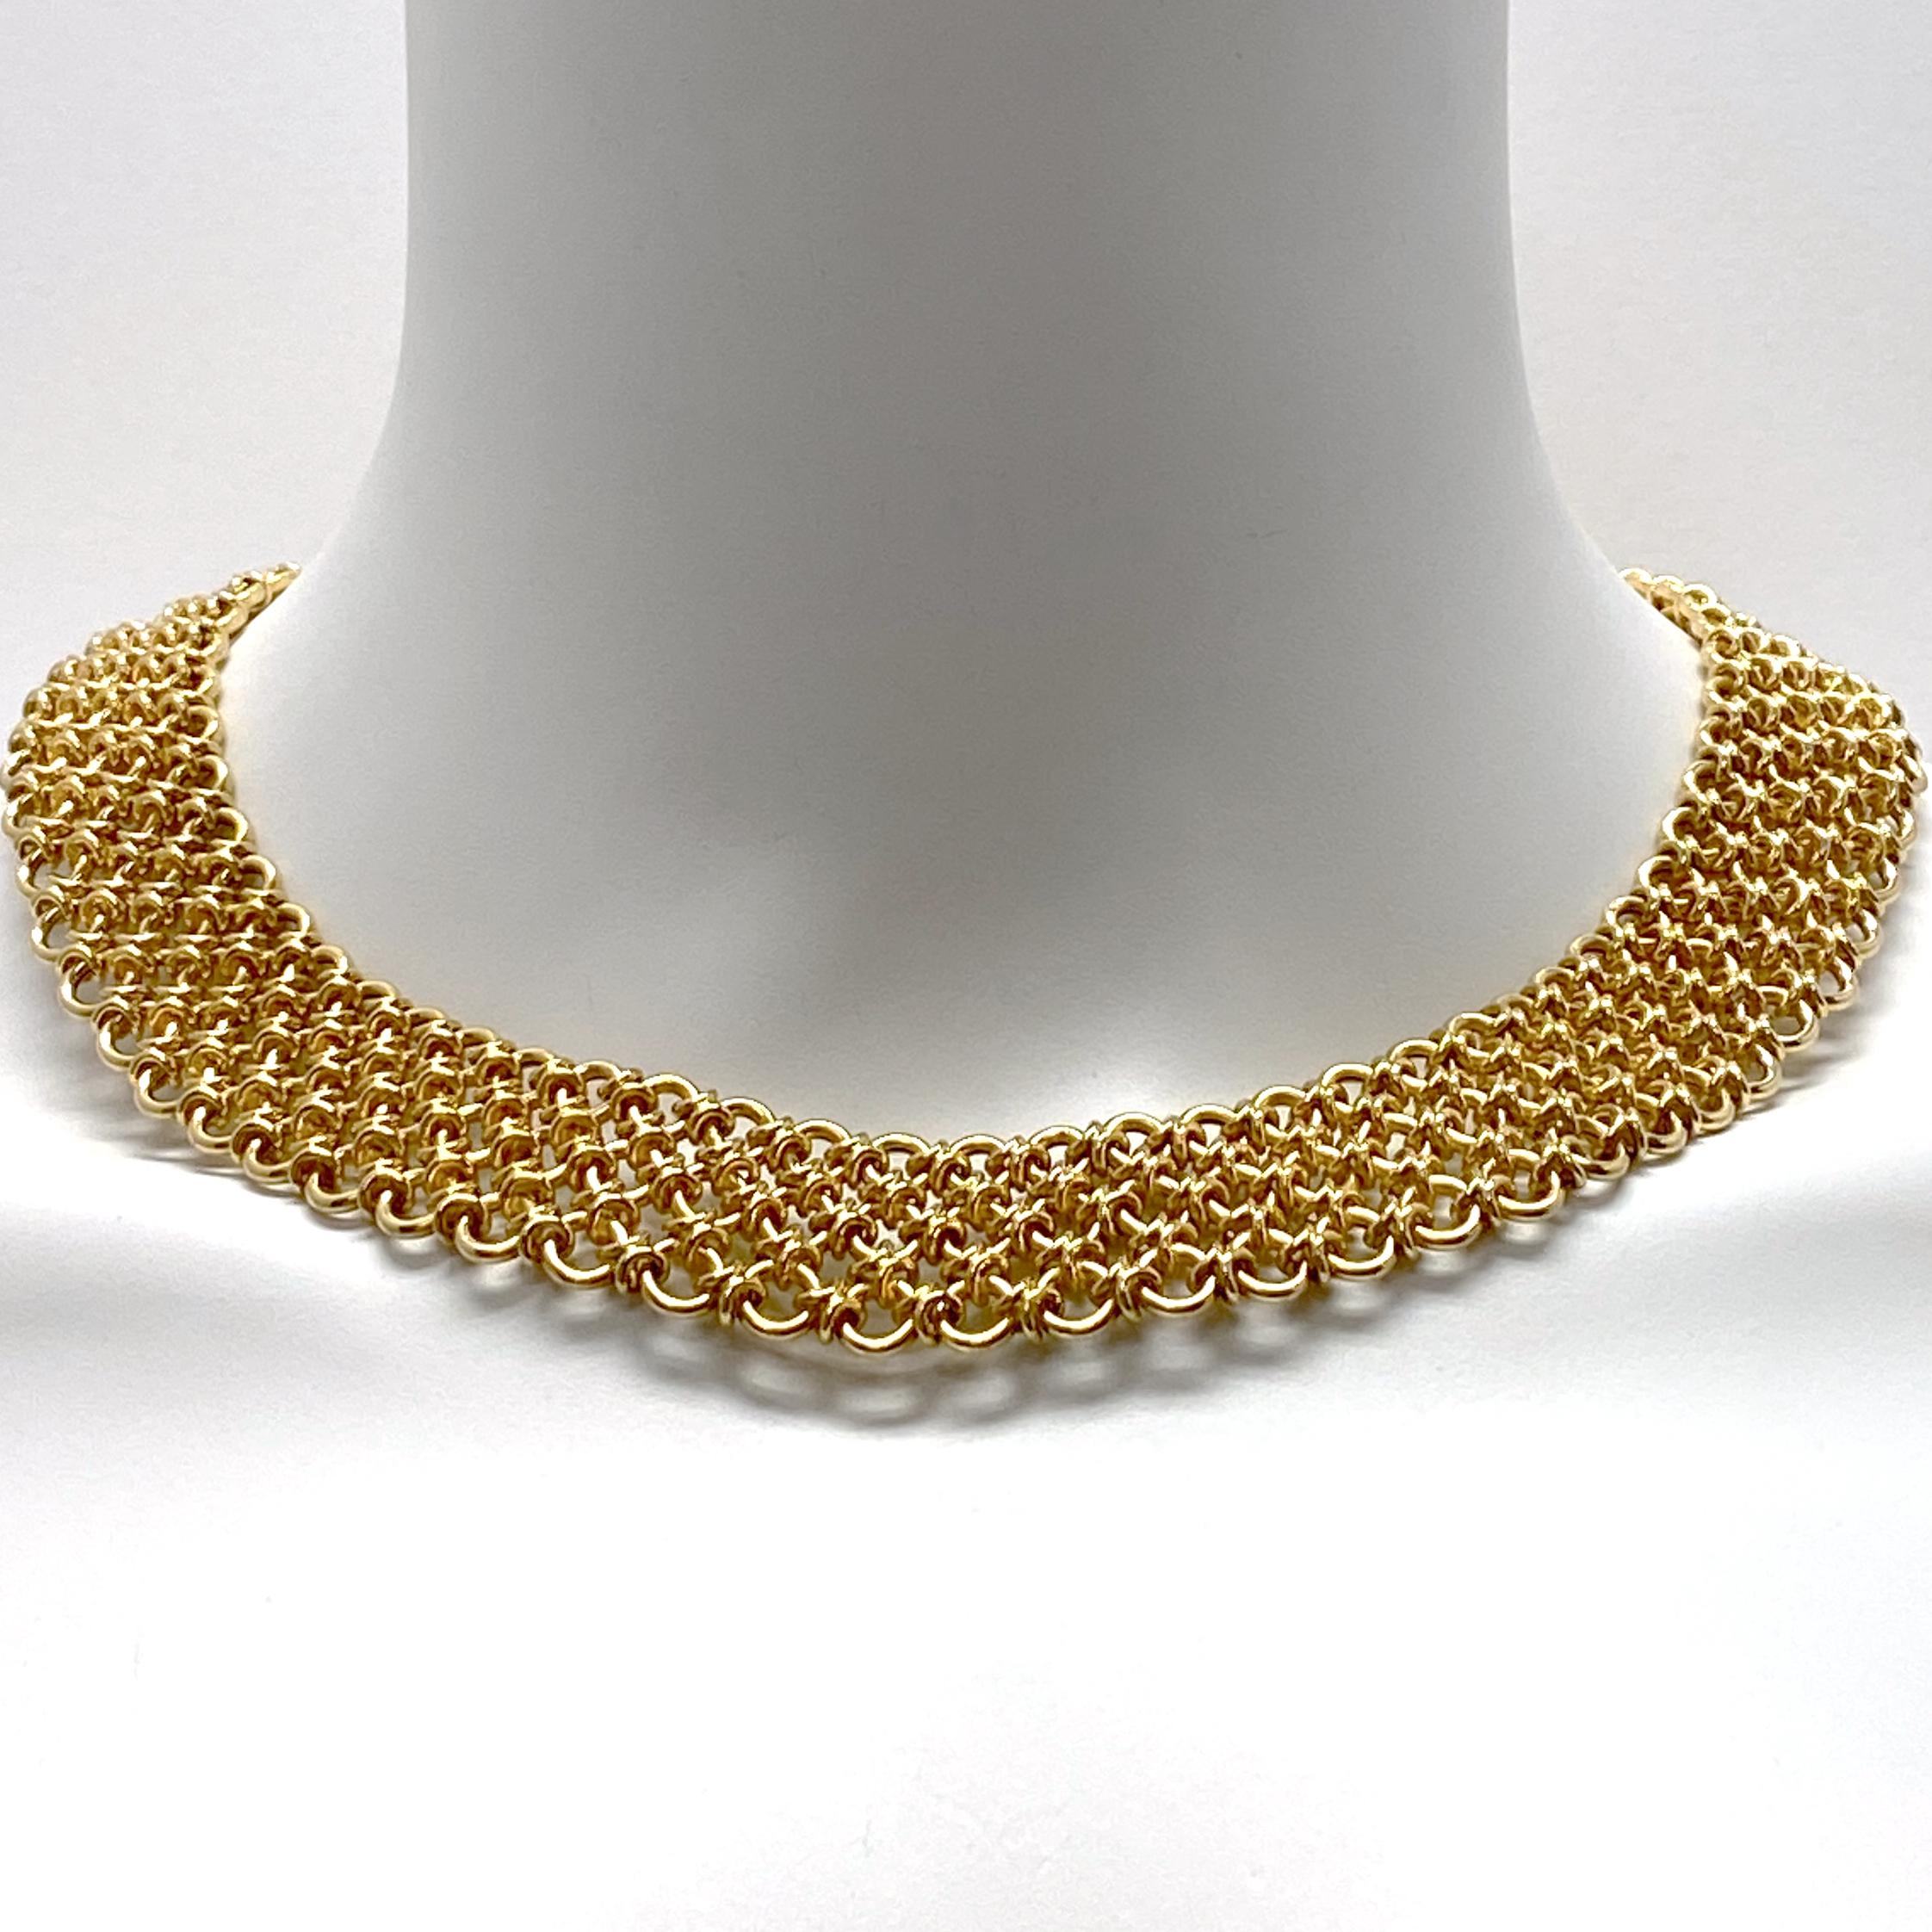 Endlessly versatile, sexy and substantial, this beautifully made gold collar is constructed of three rows of round rings, subtly graduated (smaller on top) to create the contour necessary to lie flat against the skin. Each ring is joined to its